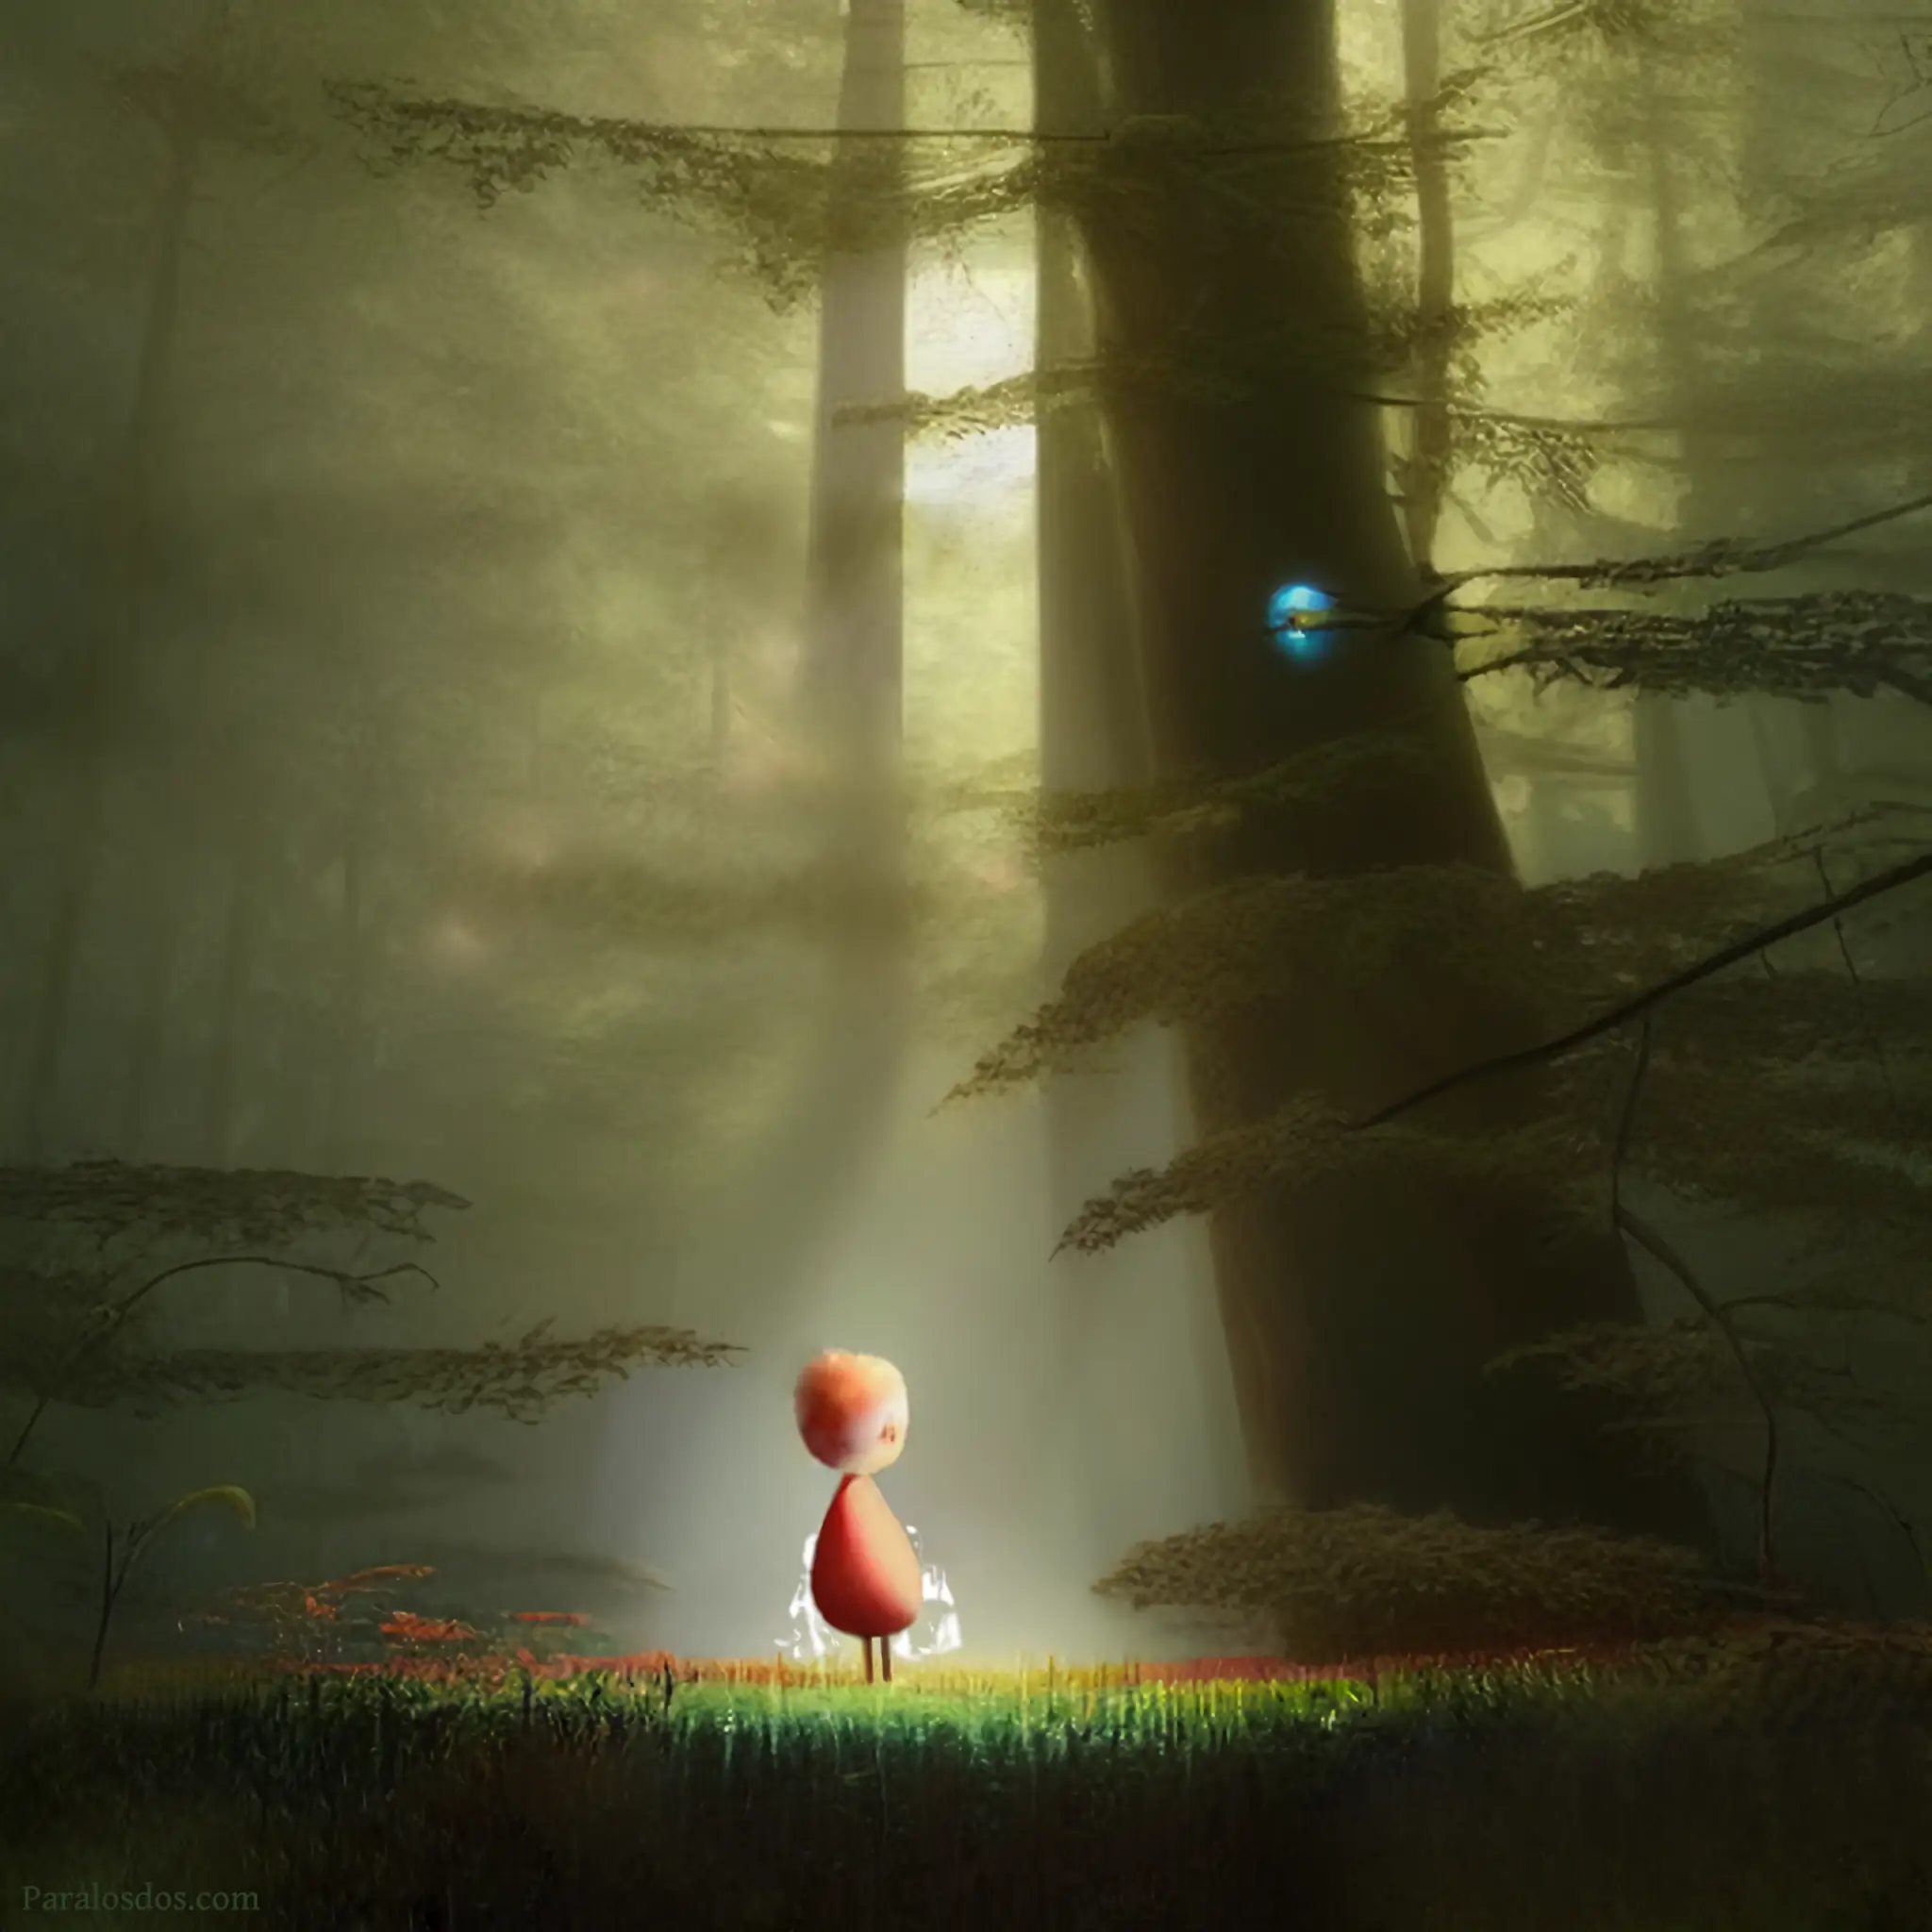 An artistic rendering of a figure bathed in light i a peaceful woods.